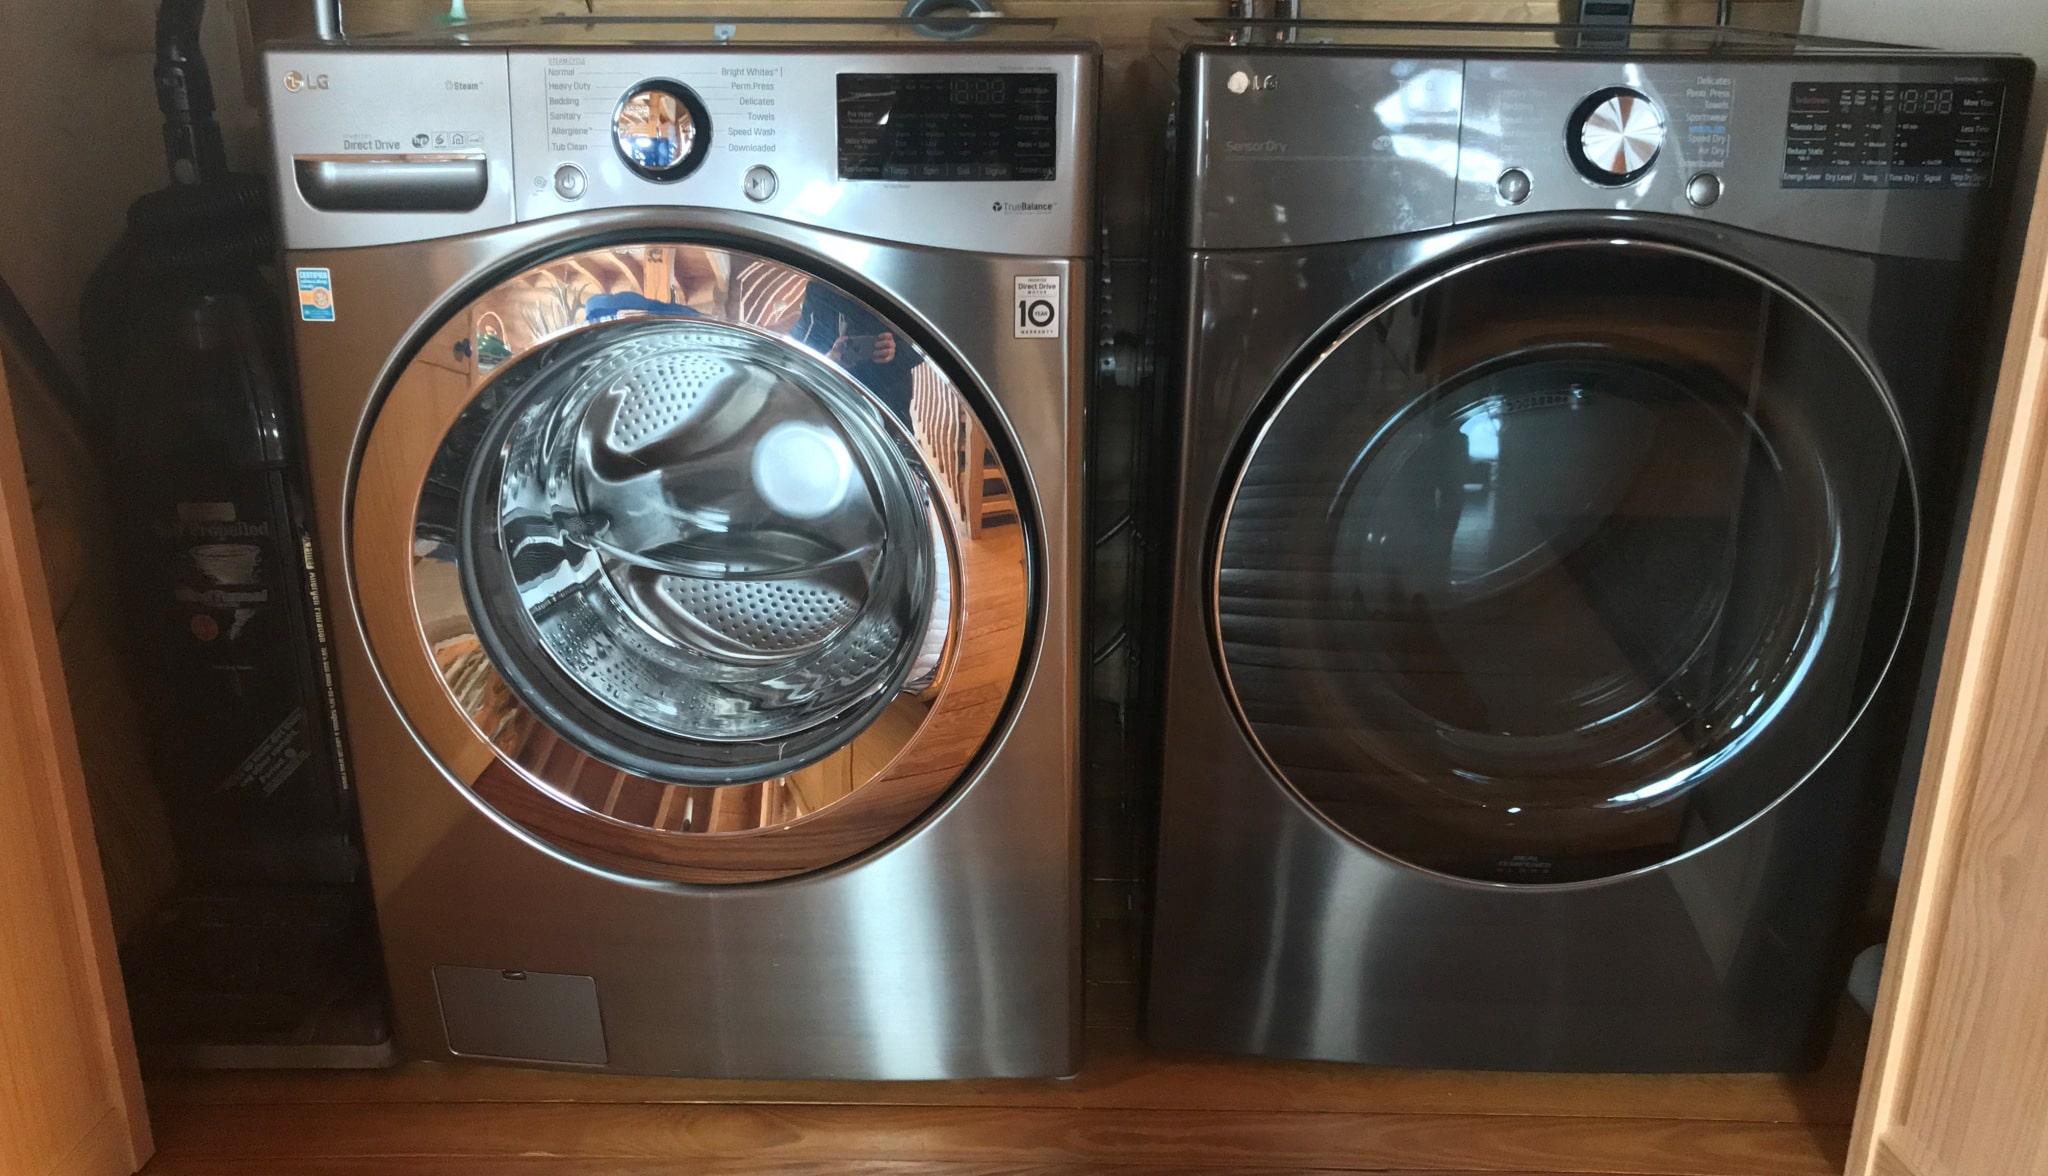 Full size Washer and Dryer upstairs